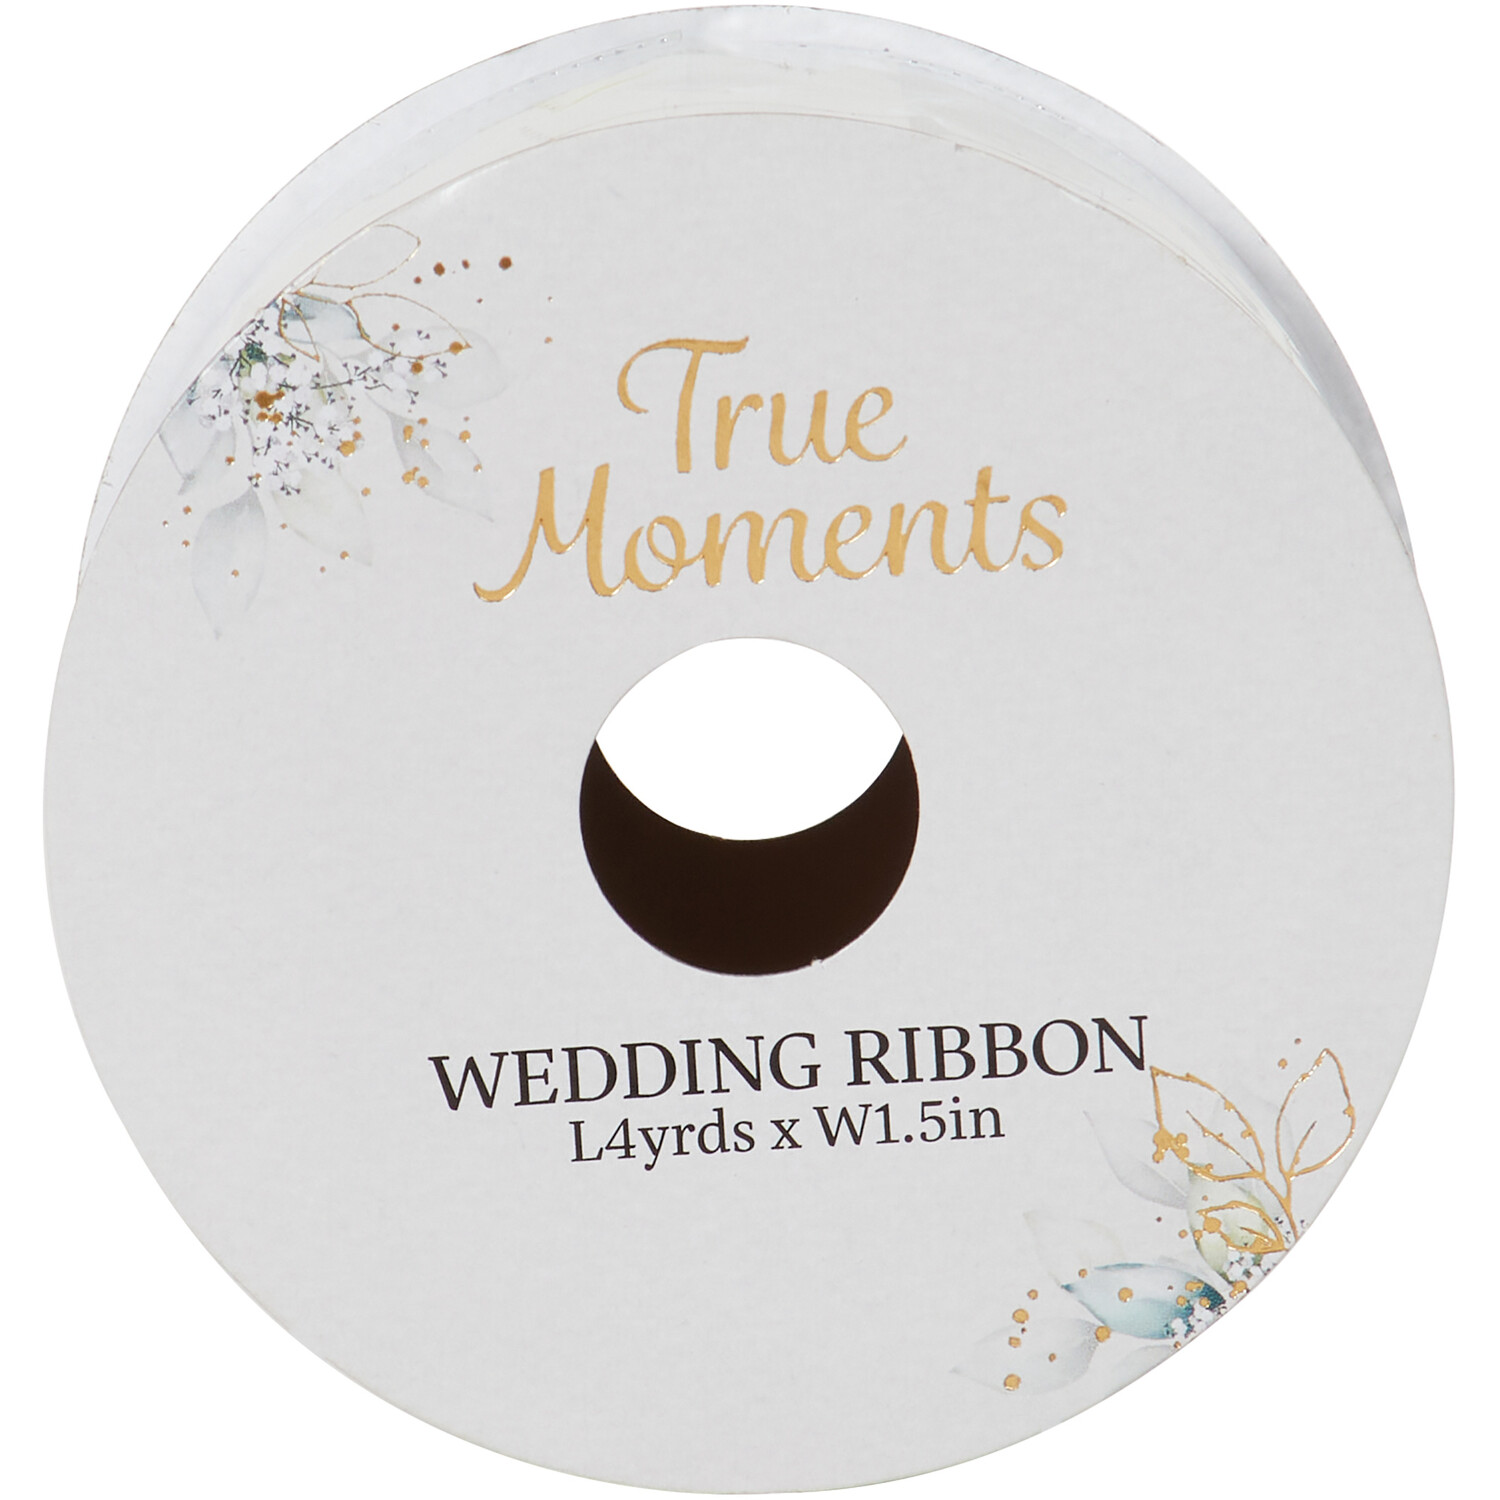 Single True Moments Wedding Ribbon in Assorted styles Image 2